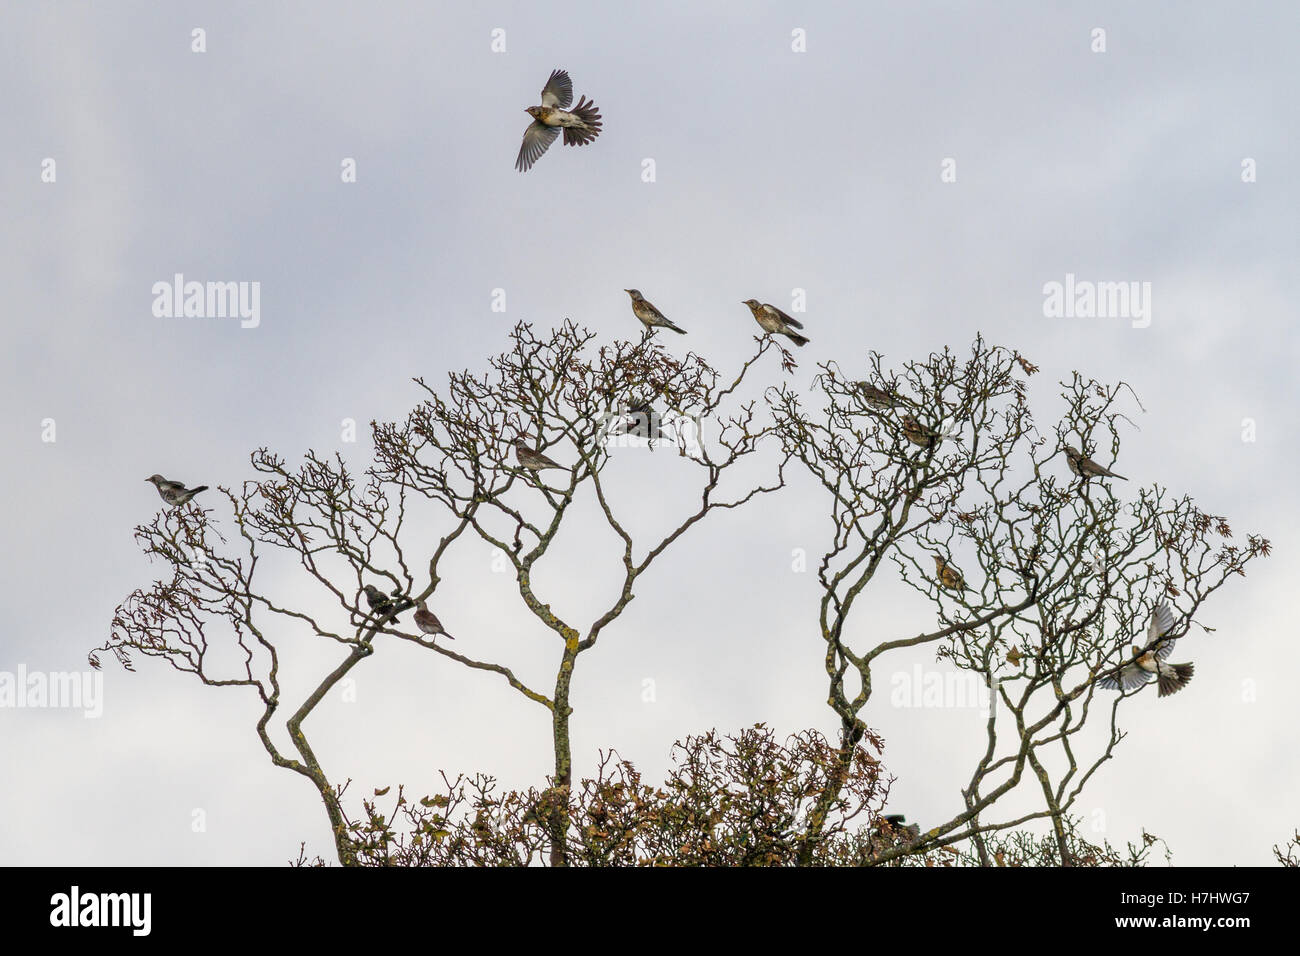 Flock of fieldfares, having arrived on migration, some in flight, in the treetops Stock Photo